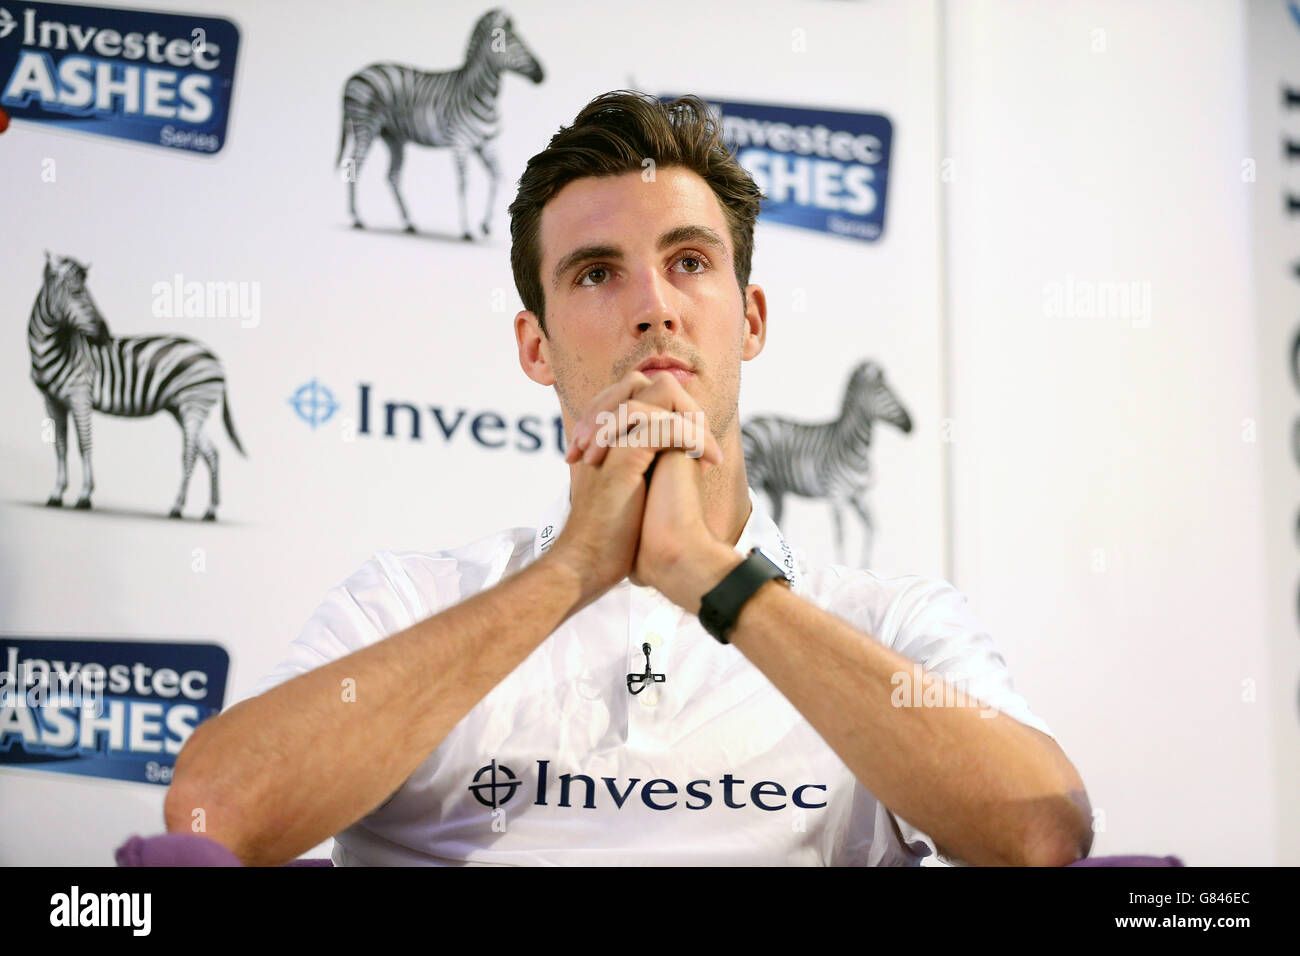 Cricket - 2015 Investec Ashes - Offical Launch - Investec Bank Stock Photo